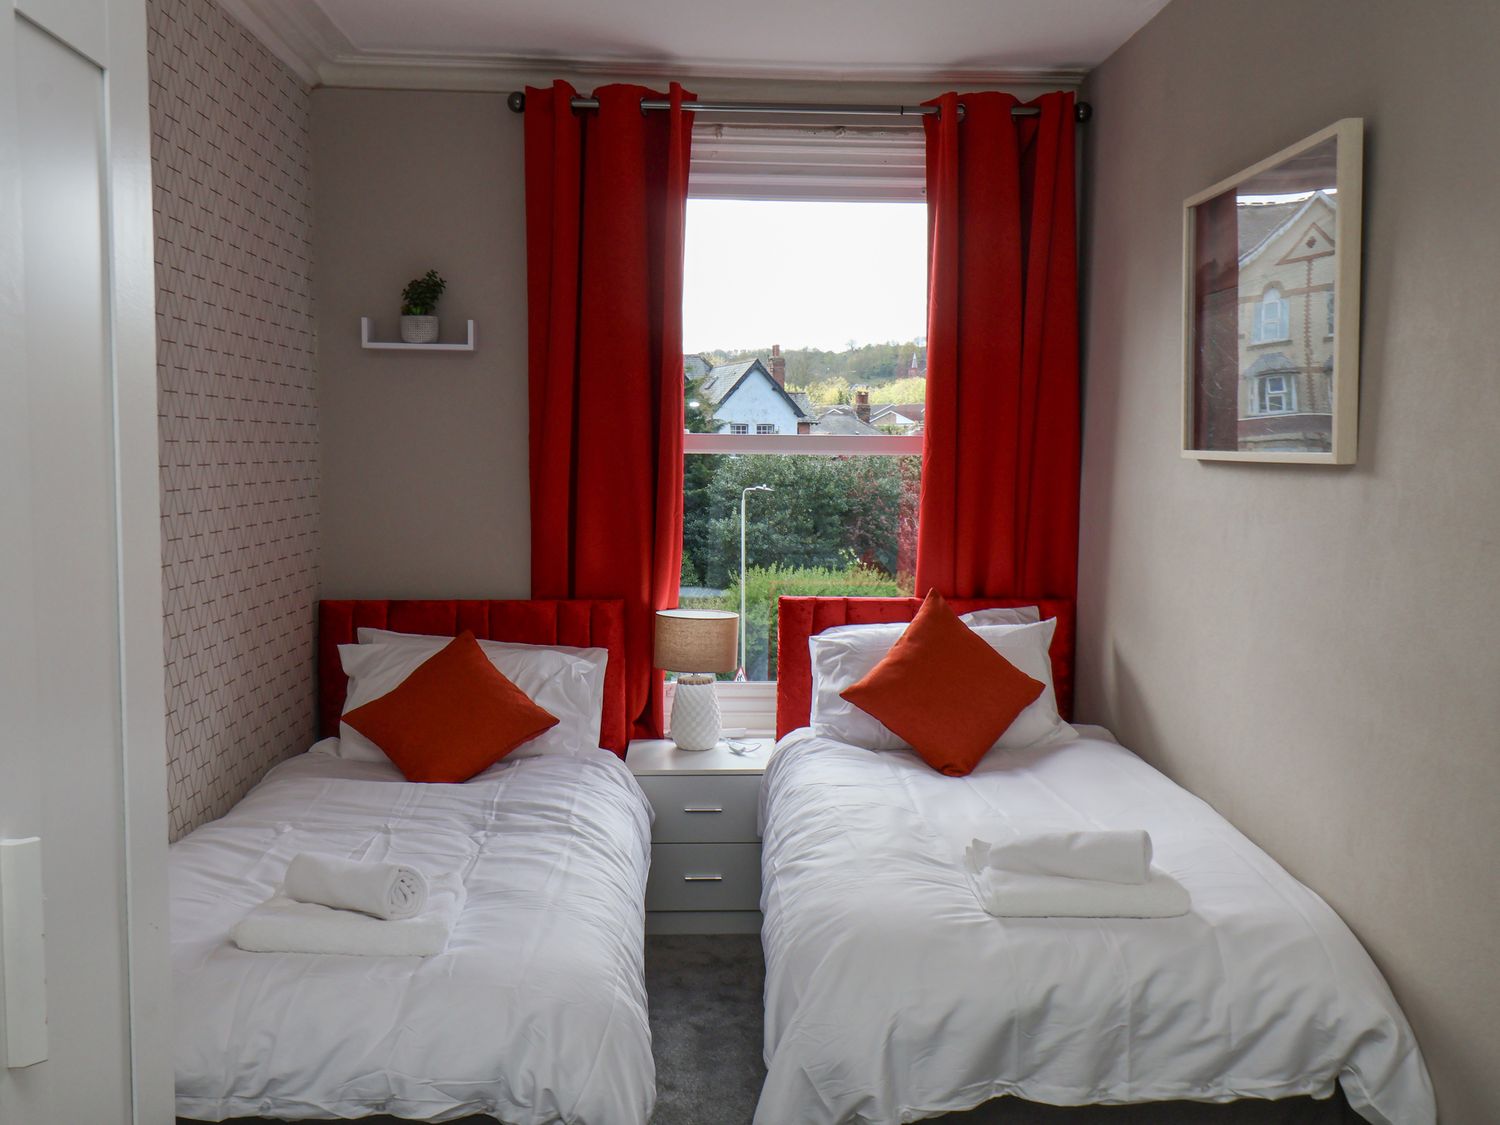 The Corner House, Scarborough, North Yorkshire. Near North York Moors National Park. Close to beach.